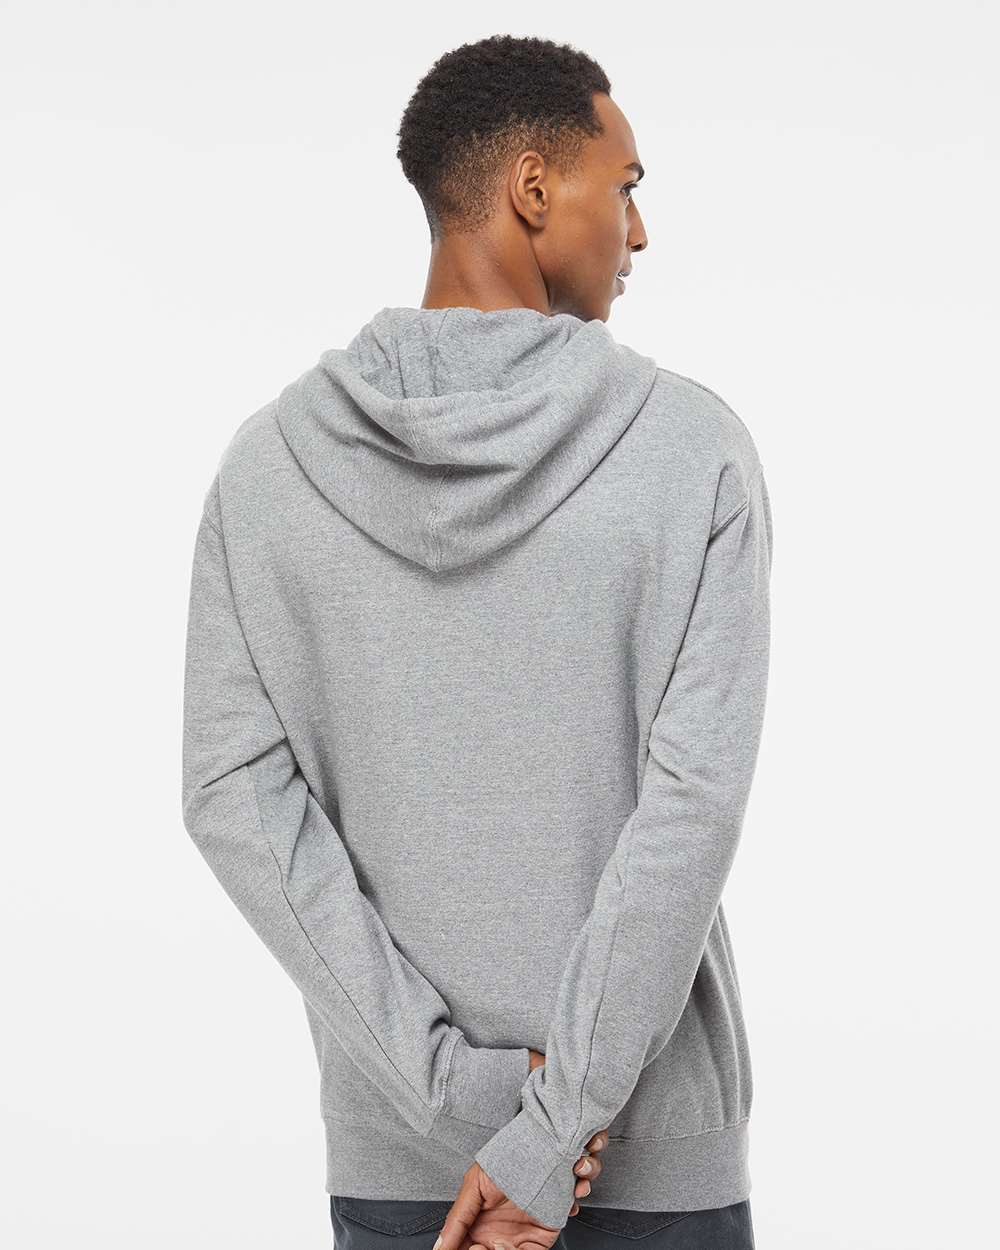 Independent Trading Co. Midweight Full-Zip Hooded Sweatshirt SS4500Z #colormdl_Grey Heather